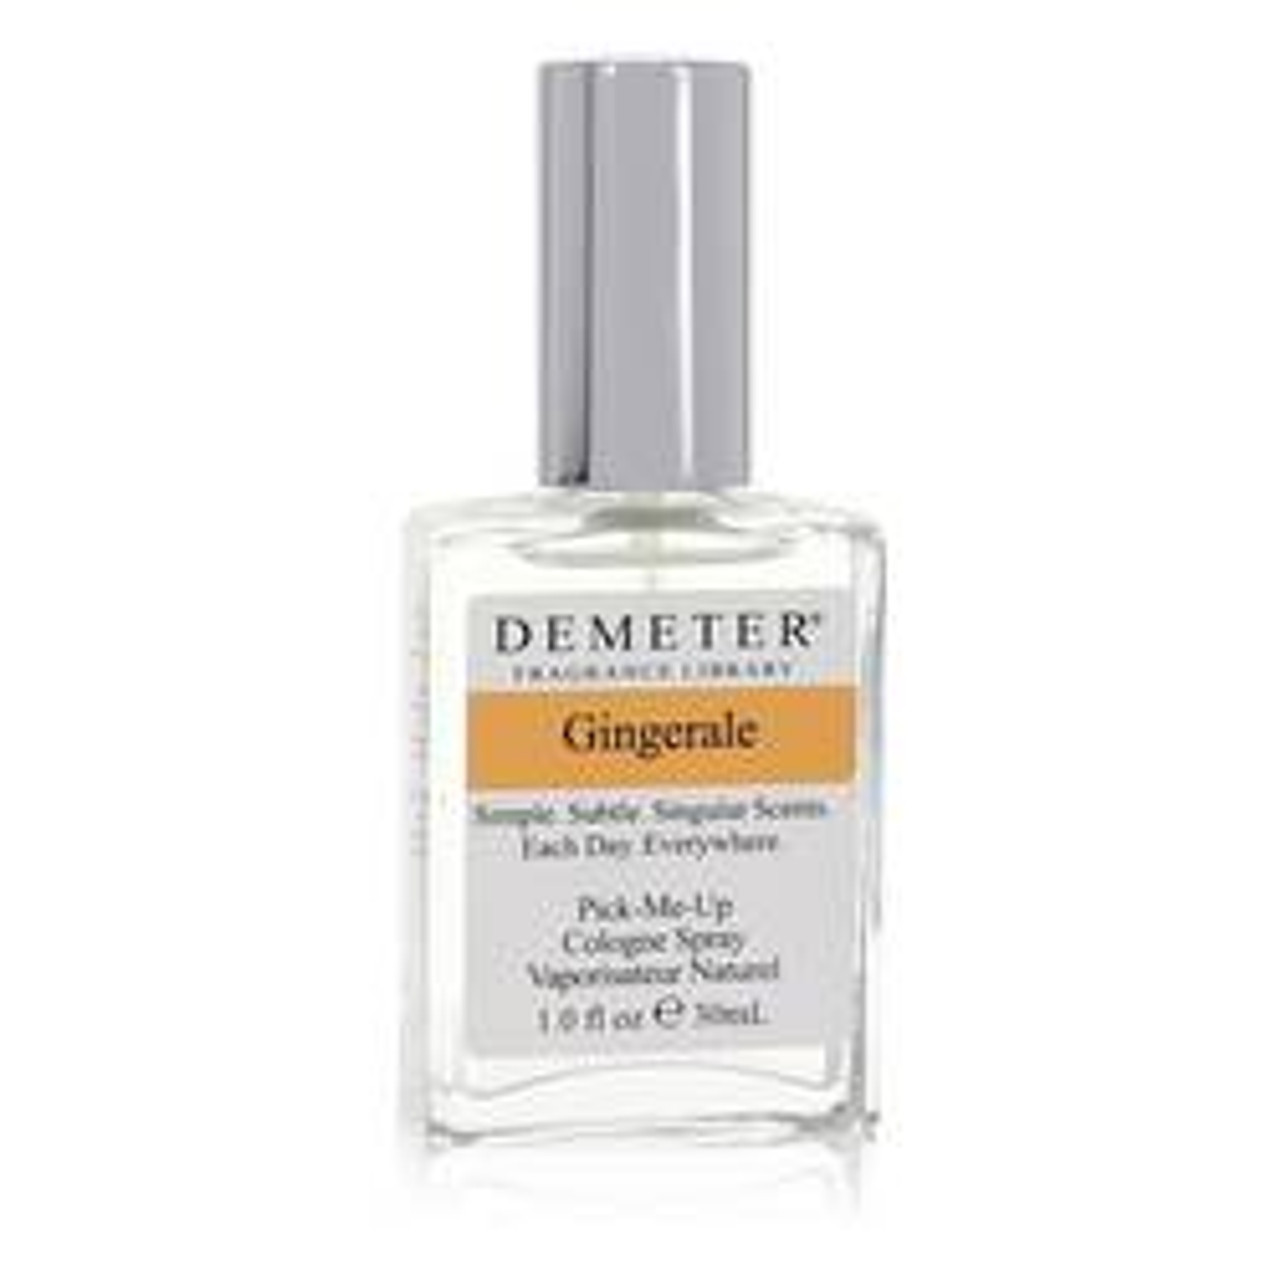 Demeter Gingerale Perfume By Demeter Cologne Spray 1 oz for Women - [From 35.00 - Choose pk Qty ] - *Ships from Miami